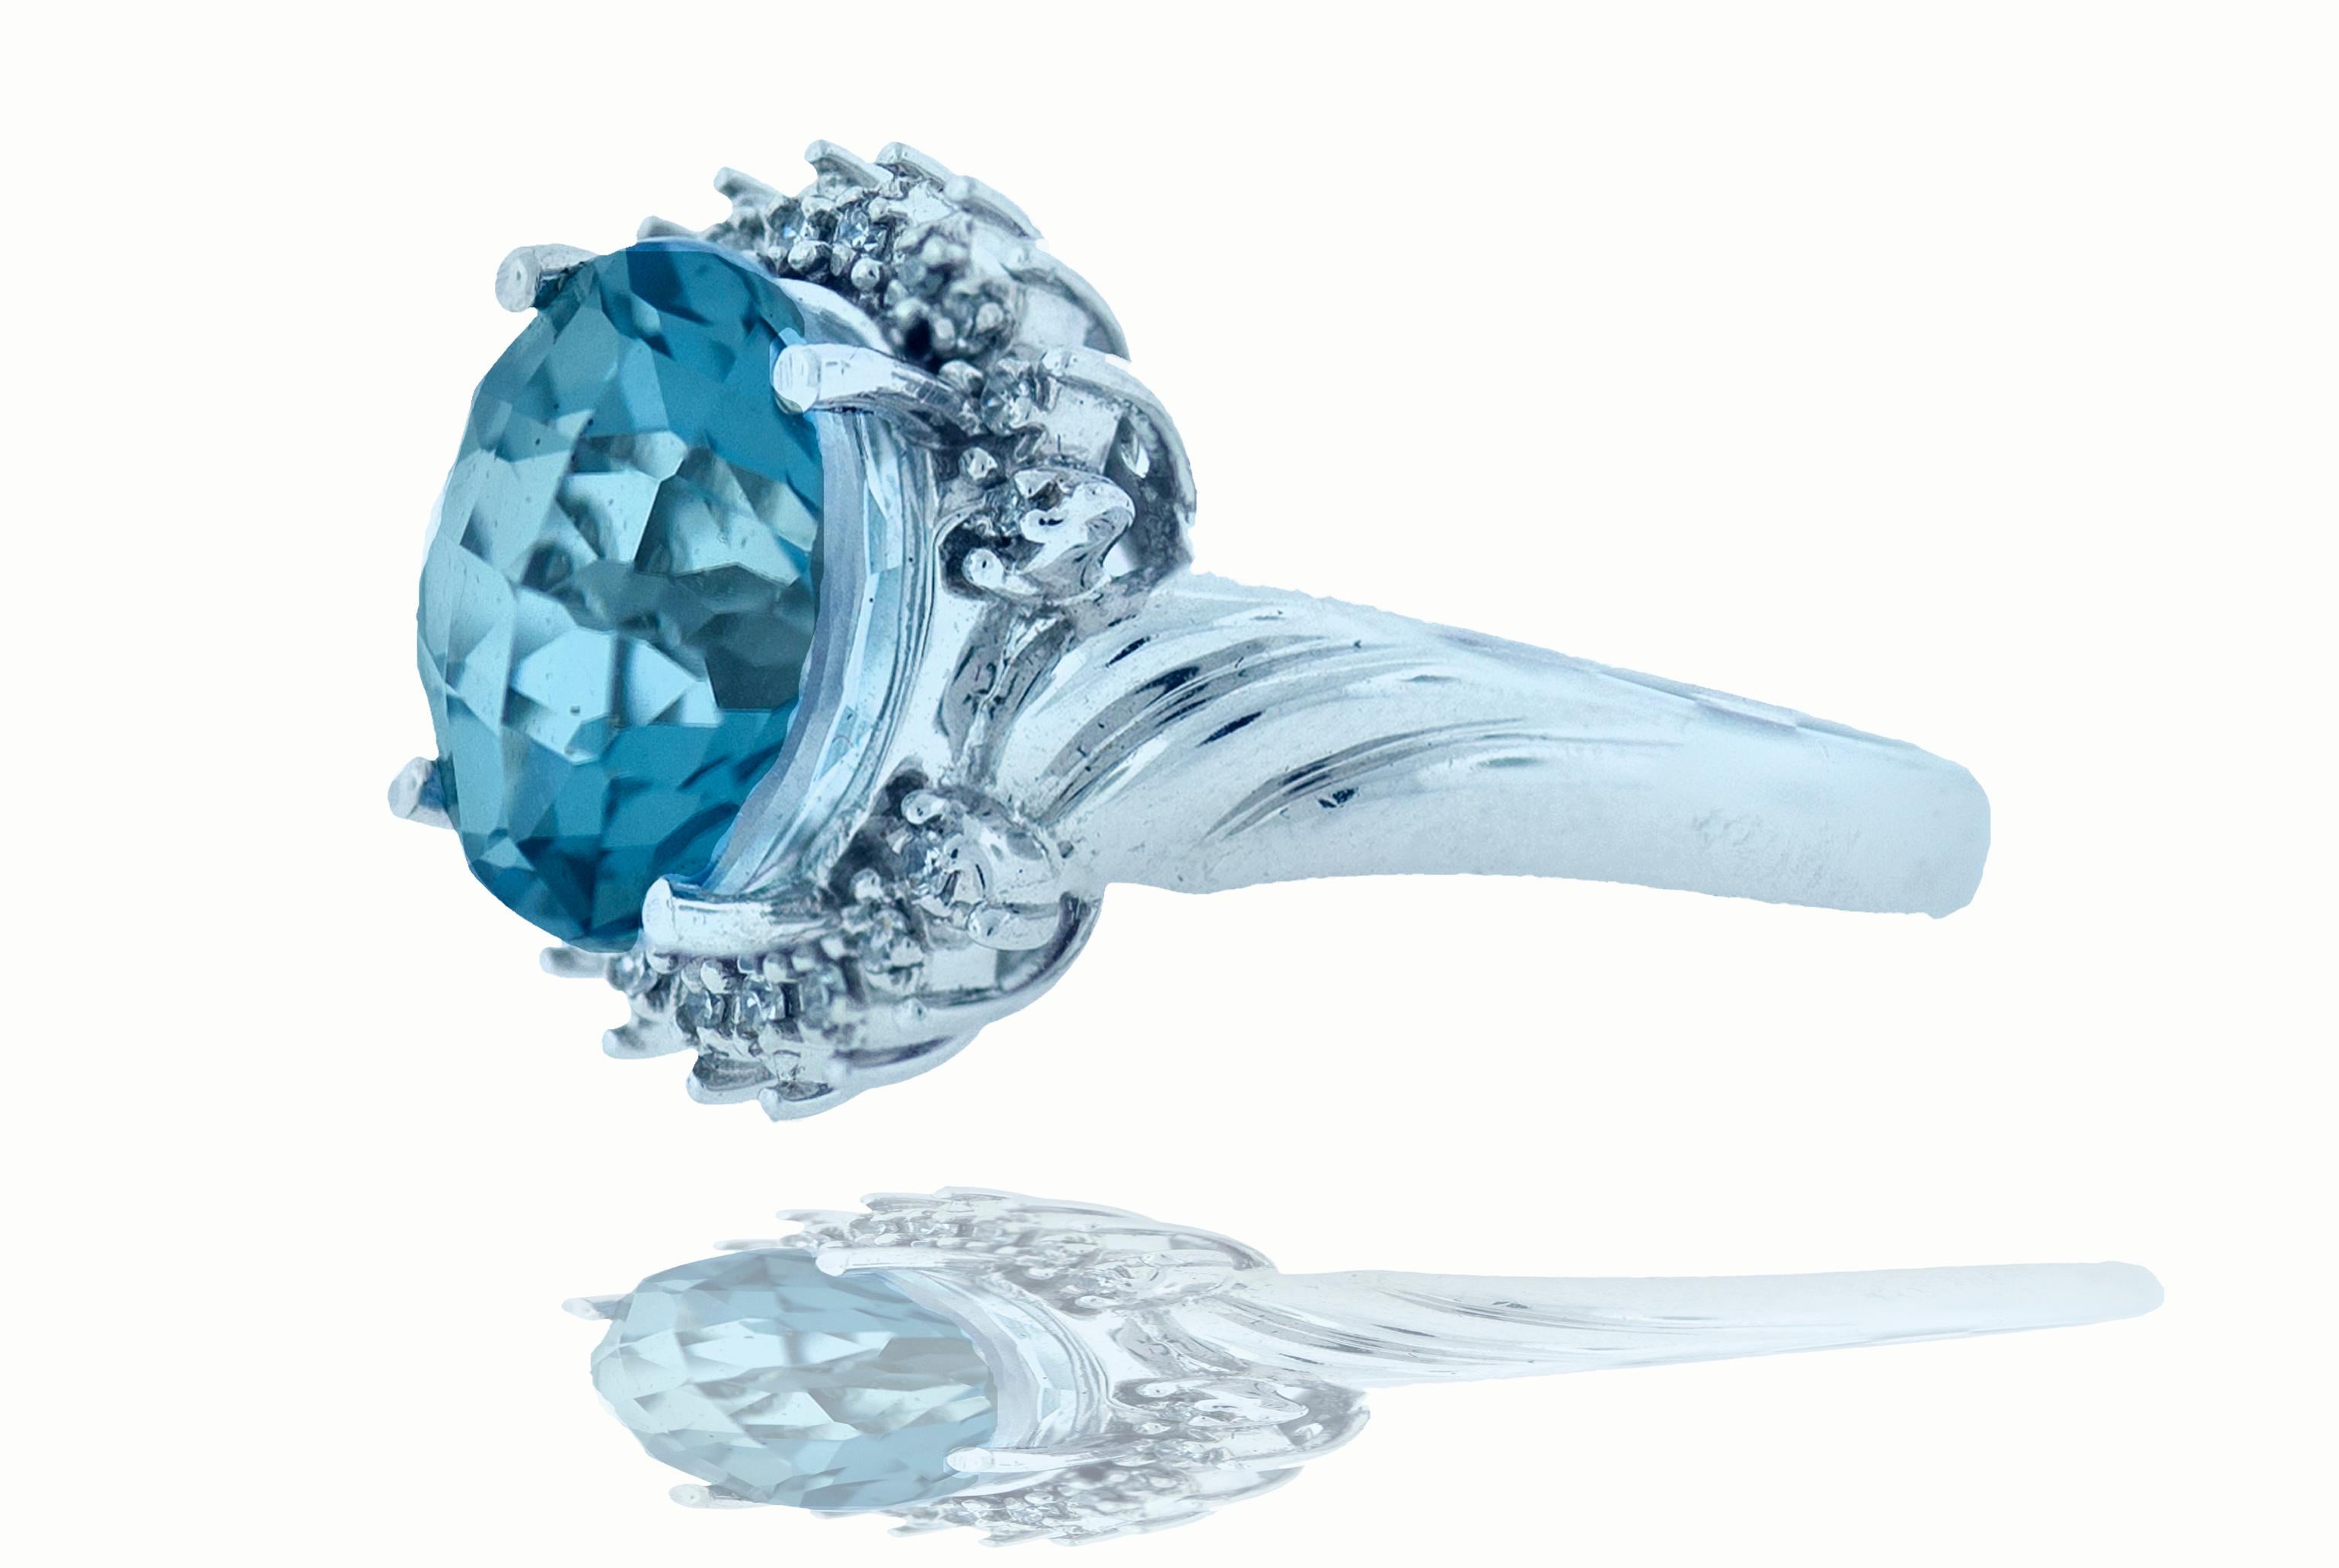 6.2 blue topaz cocktail ring with diamond halo. The center topaz of the ring measures 12.11 by 12.10 in a round cut. There are 18 - 1mm diamonds approximately .09 ctw that beautifully surrounding the center topaz. This fashion ring is set in 14k